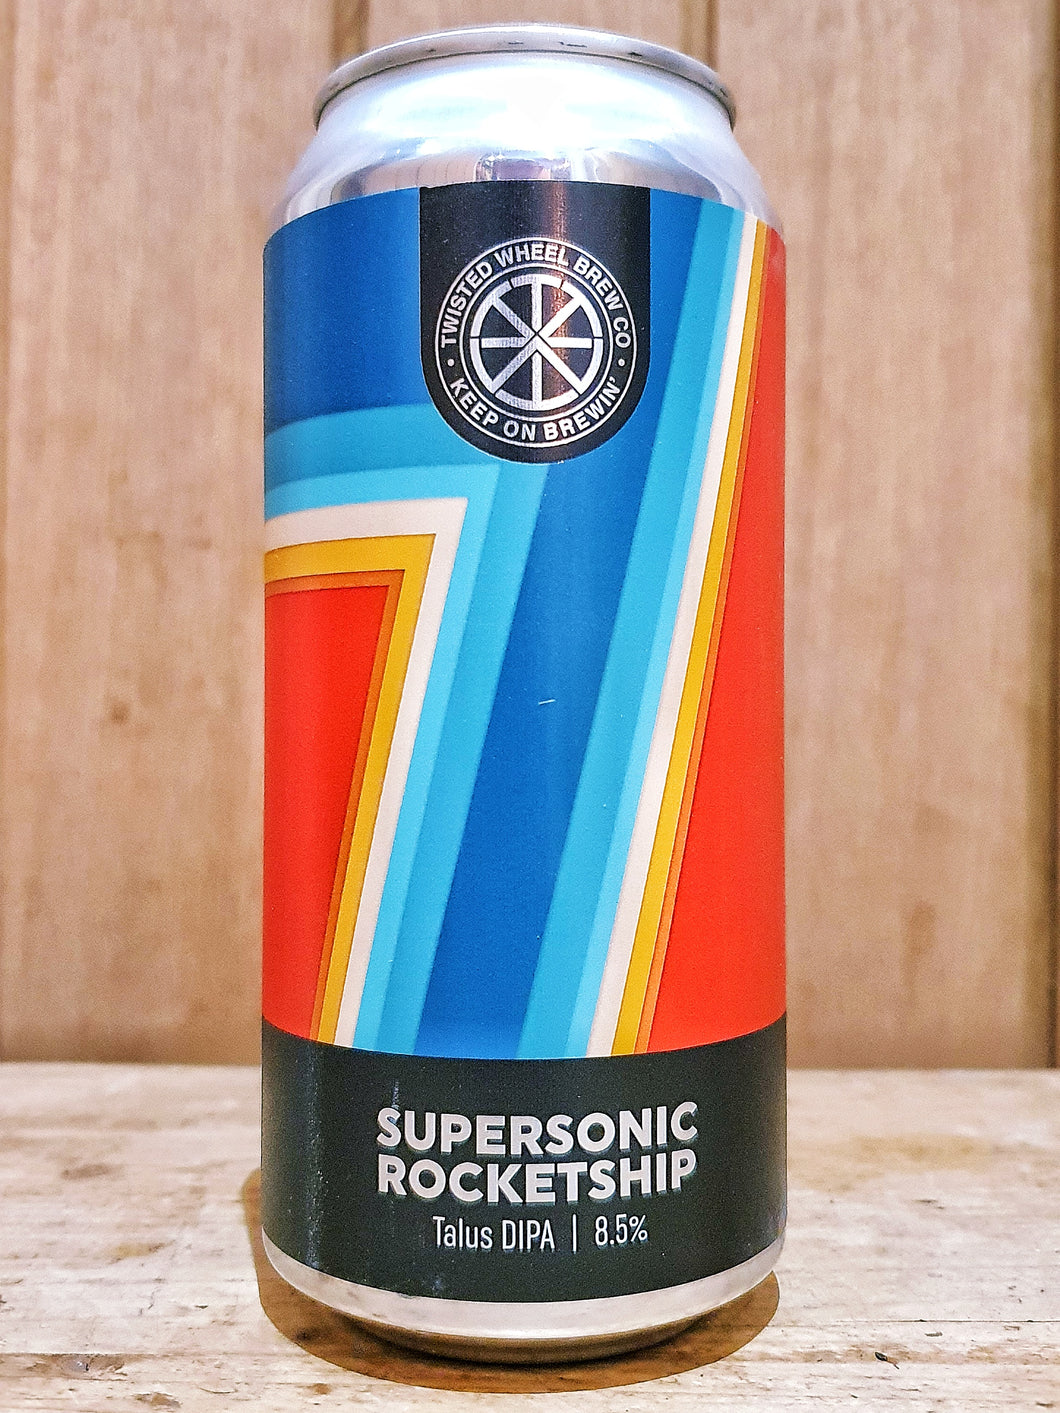 Twisted Wheel Brew Co - Supersonic Rocketship